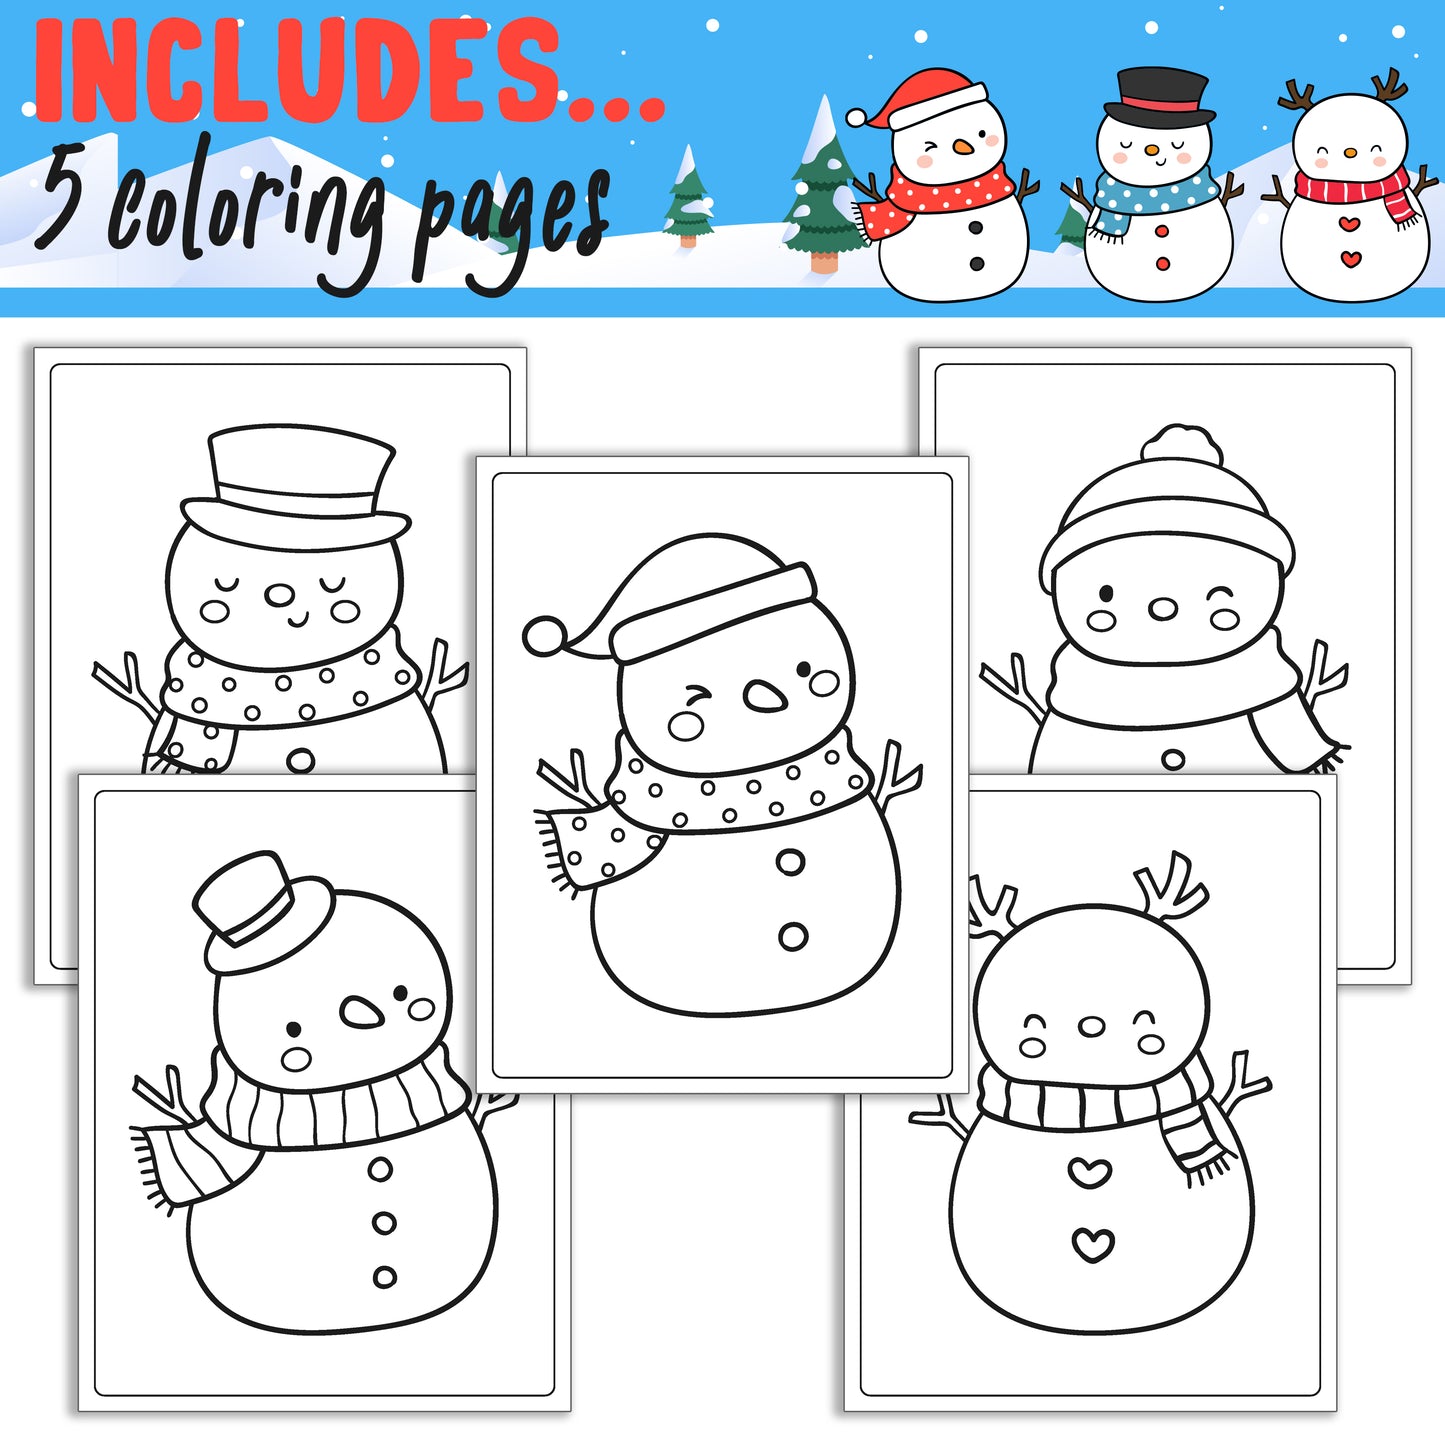 How To Draw a Snowman, Directed Drawing Step by Step Tutorial, Includes 5 Coloring Pages, PDF File, Instant Download